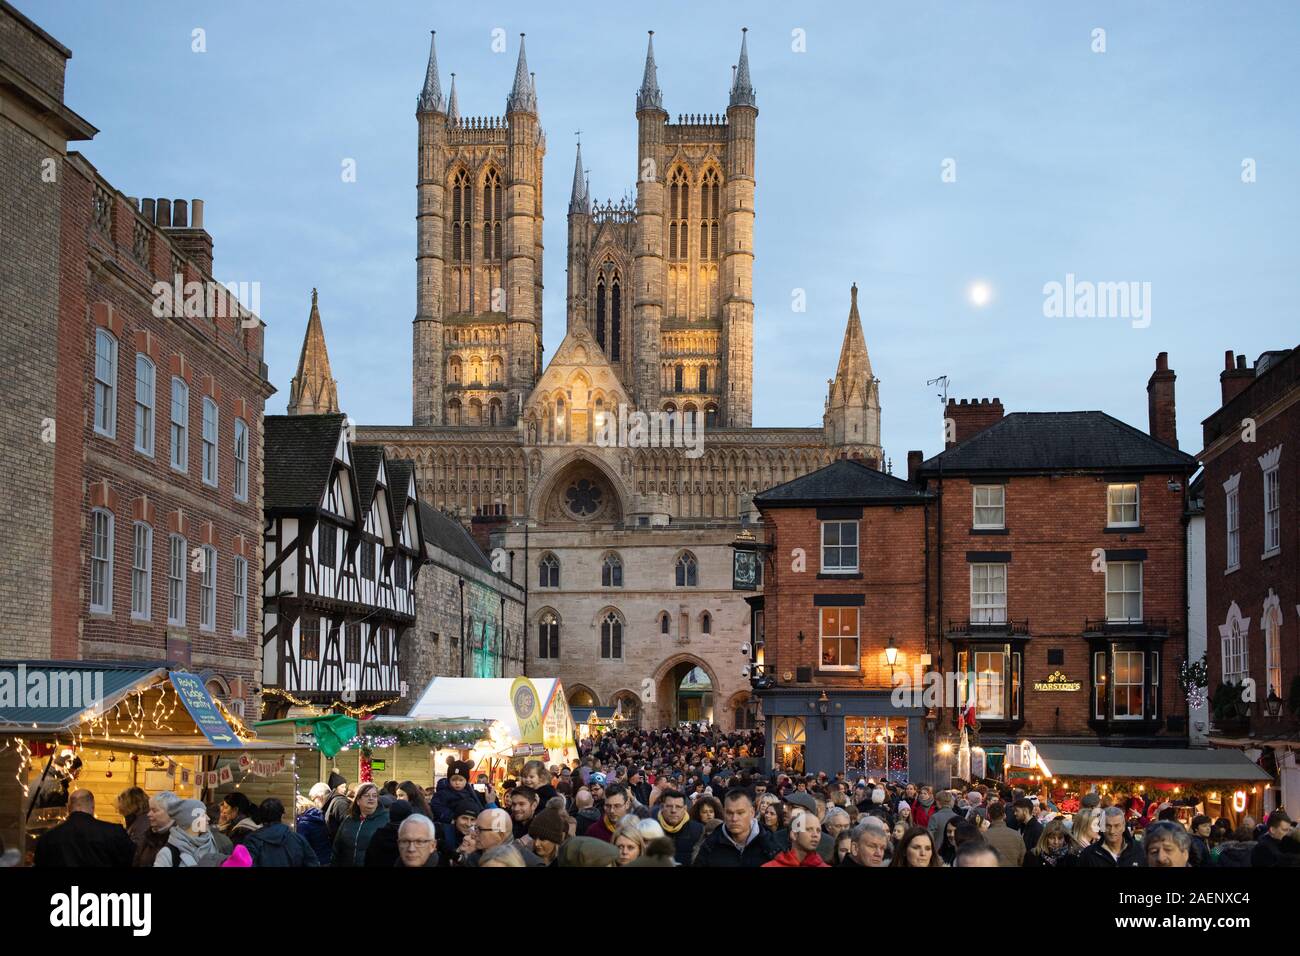 Lincoln Cathedral pictured with new floodlighting installed during 2019. The picture was taken during the annual Christmas market before Christmas. Stock Photo